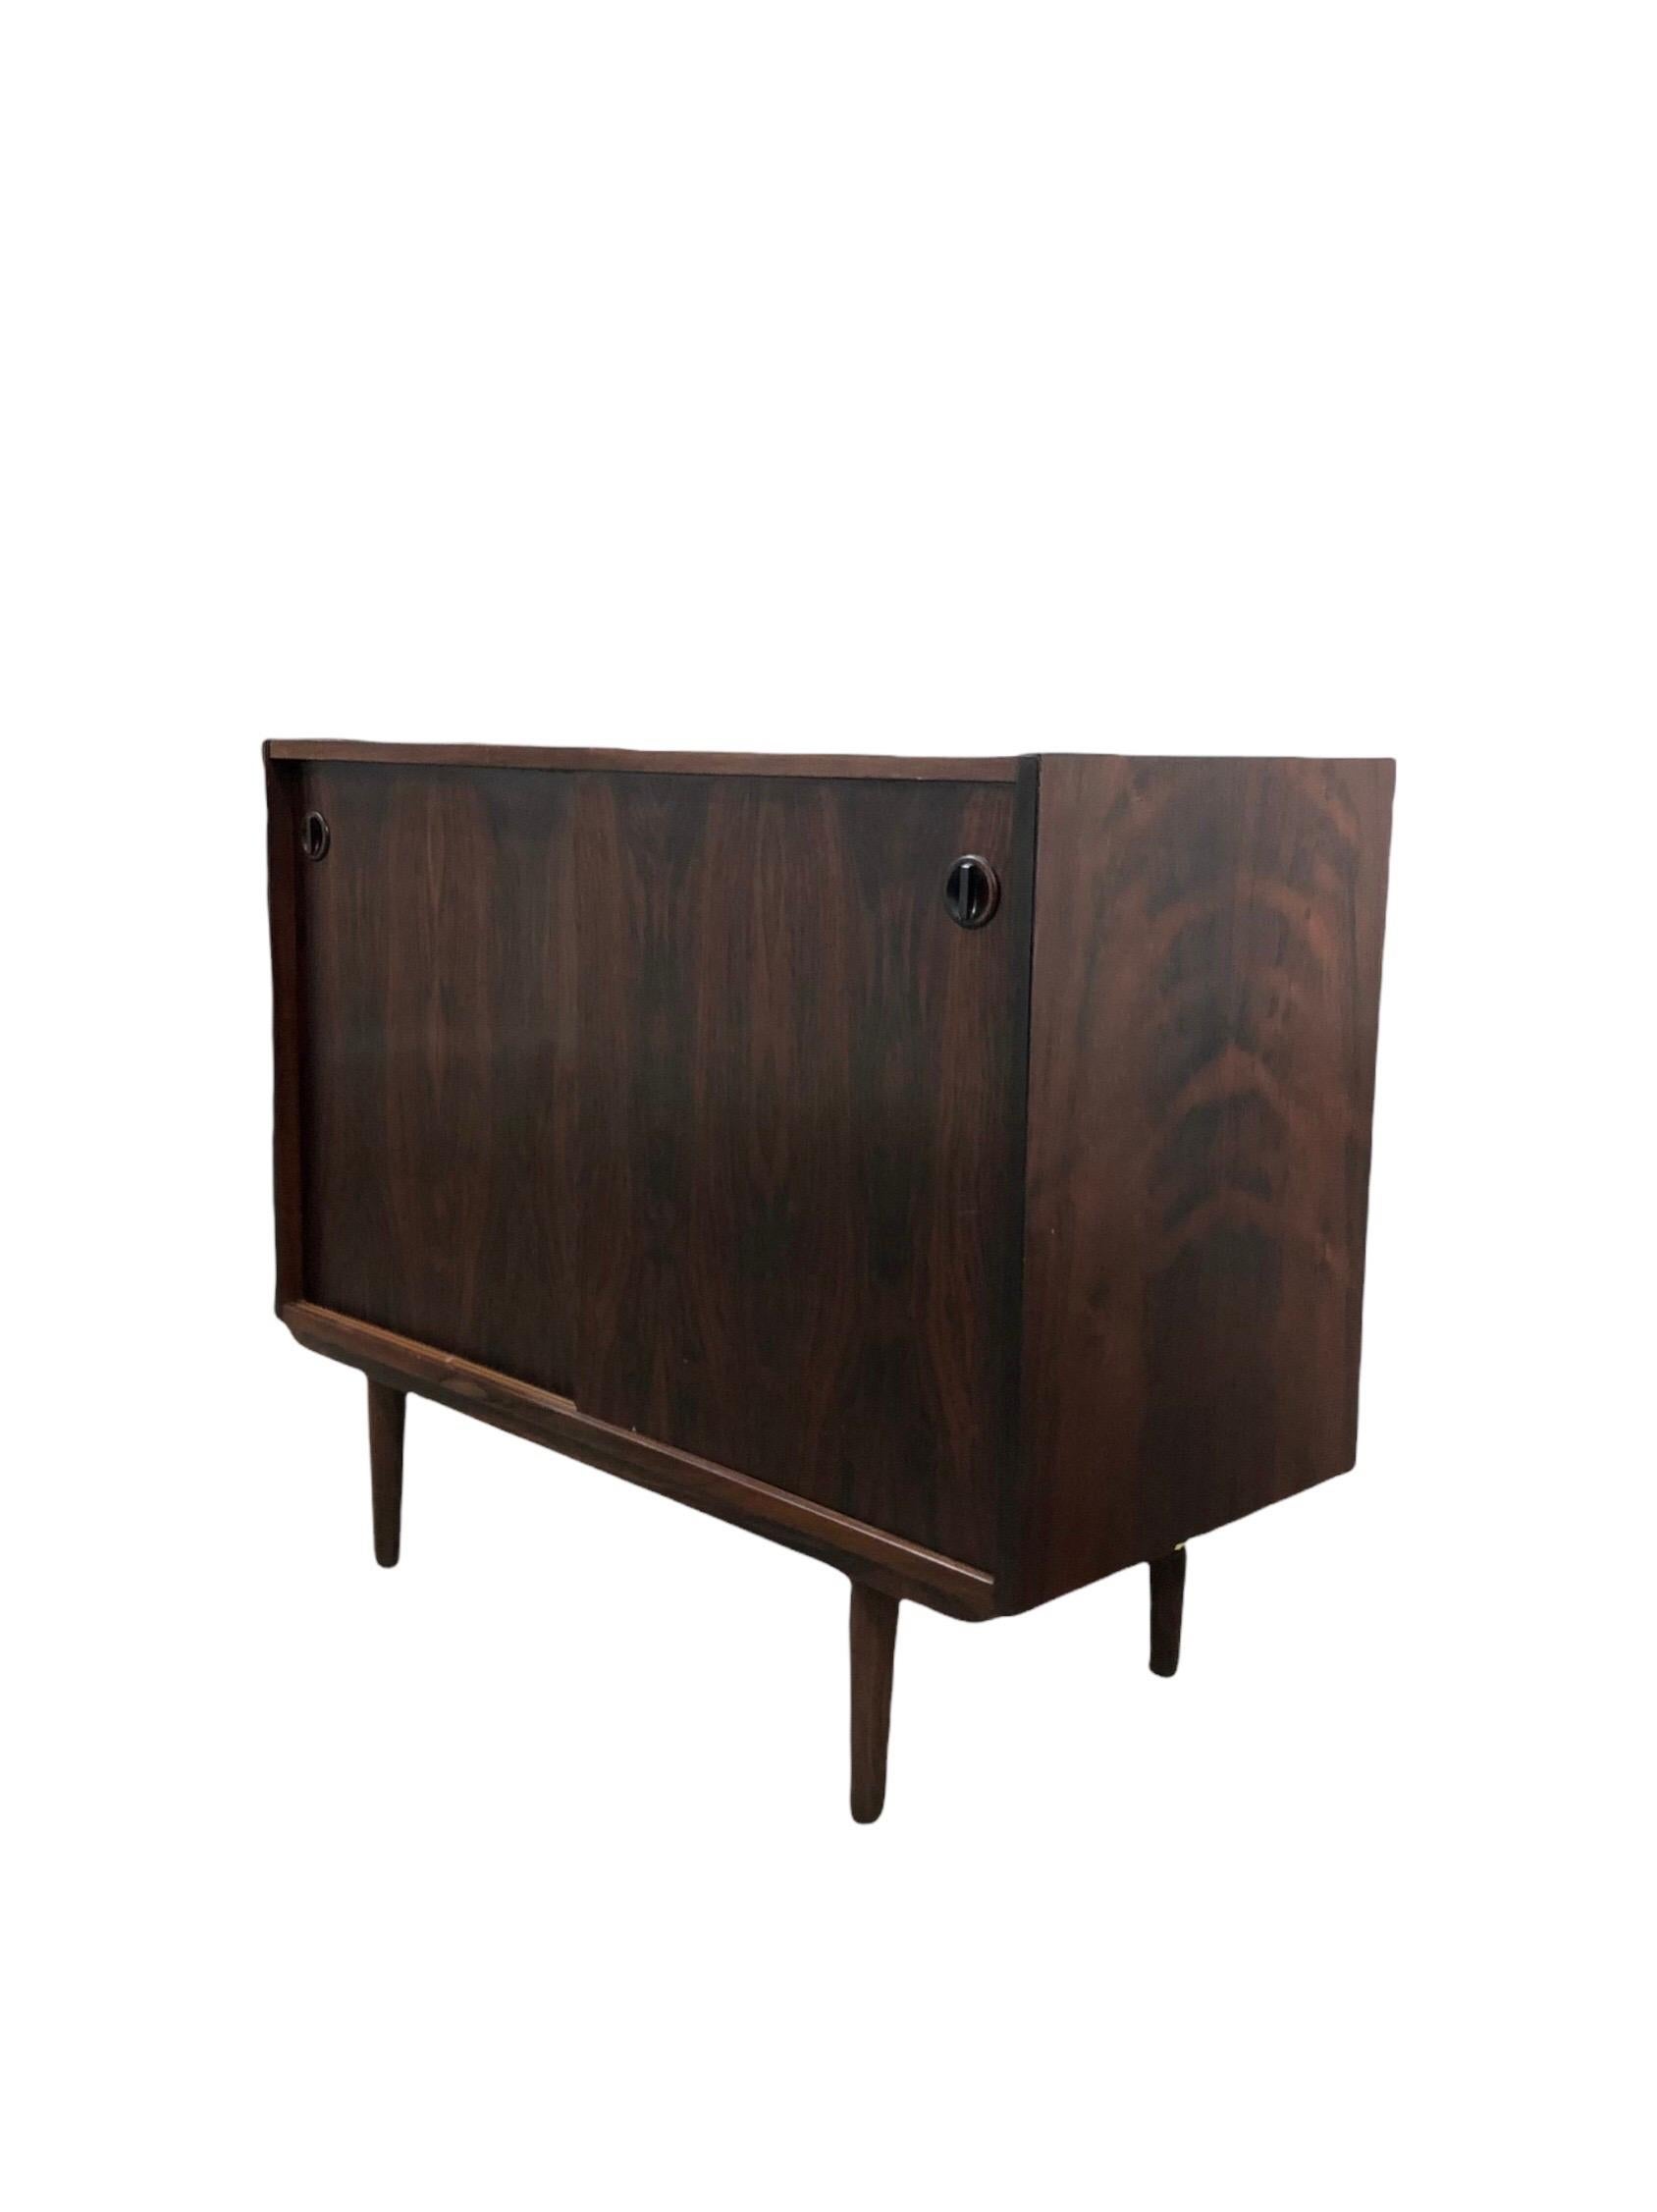 Mid-century Danish Modern rosewood cabinet in style of Kai Kristiansen, manufactured in Denmark with adjustable shelf, with two sliding doors, raised on tapered legs. Cabinet could be use as entry way cabinet or as media cabinet

Dimensions: 39 W